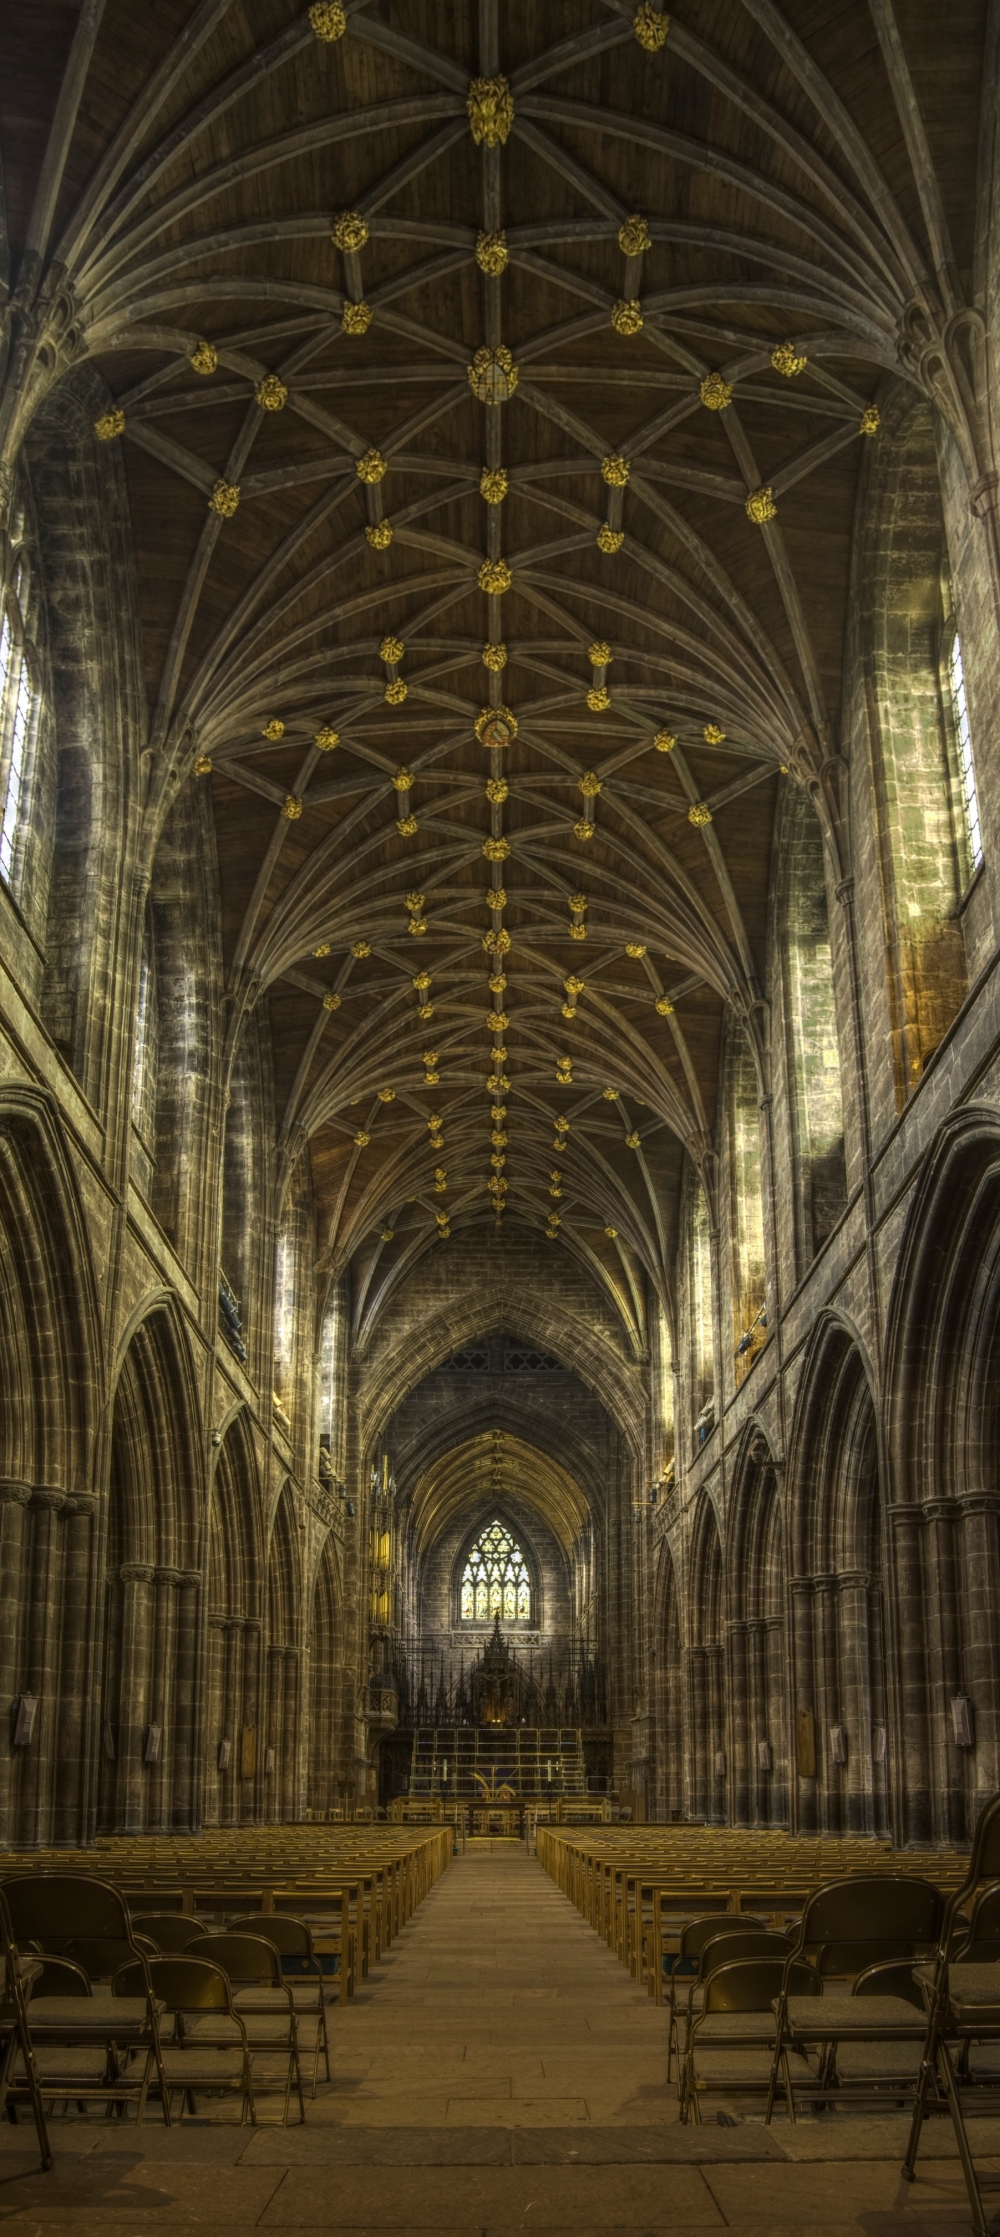 Chester_cathedral_nave.jpg